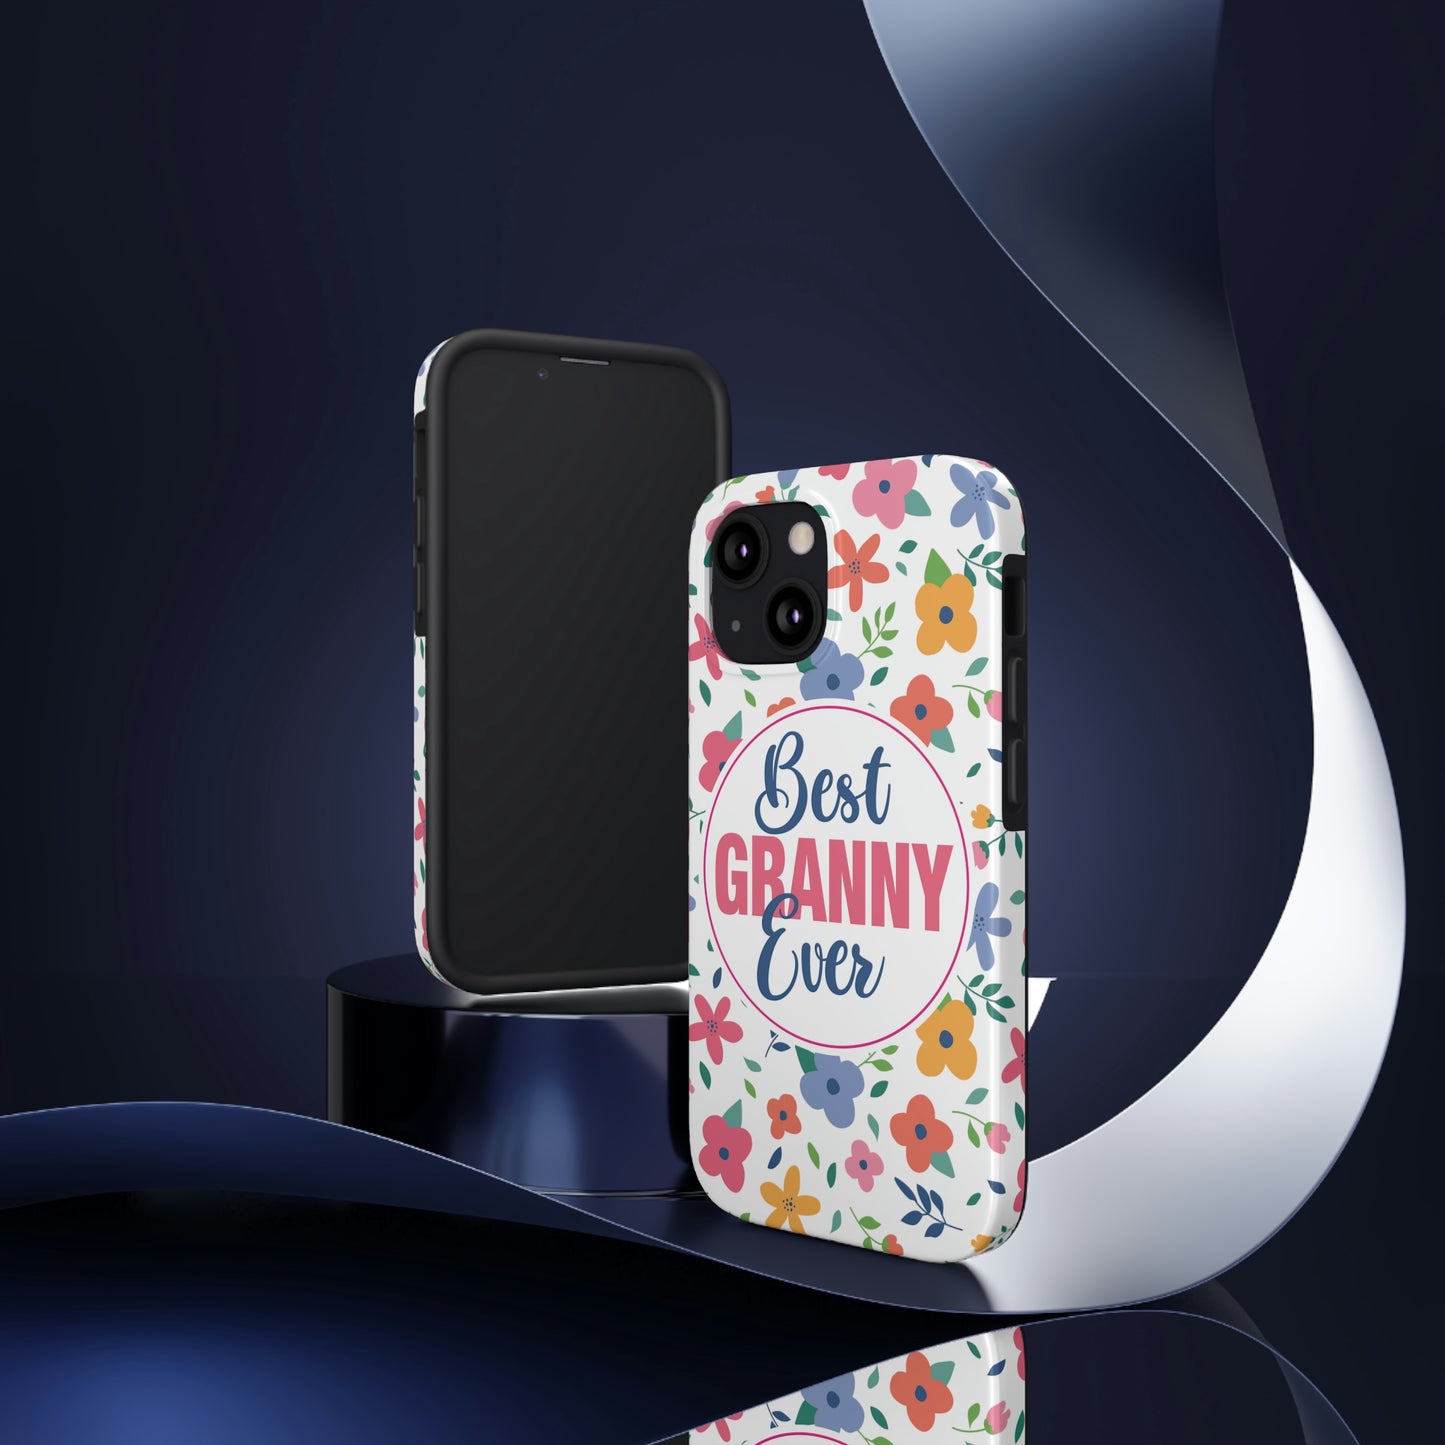 Best Granny Ever Tough Phone Cases by Case-Mate, Mothers Day Gift